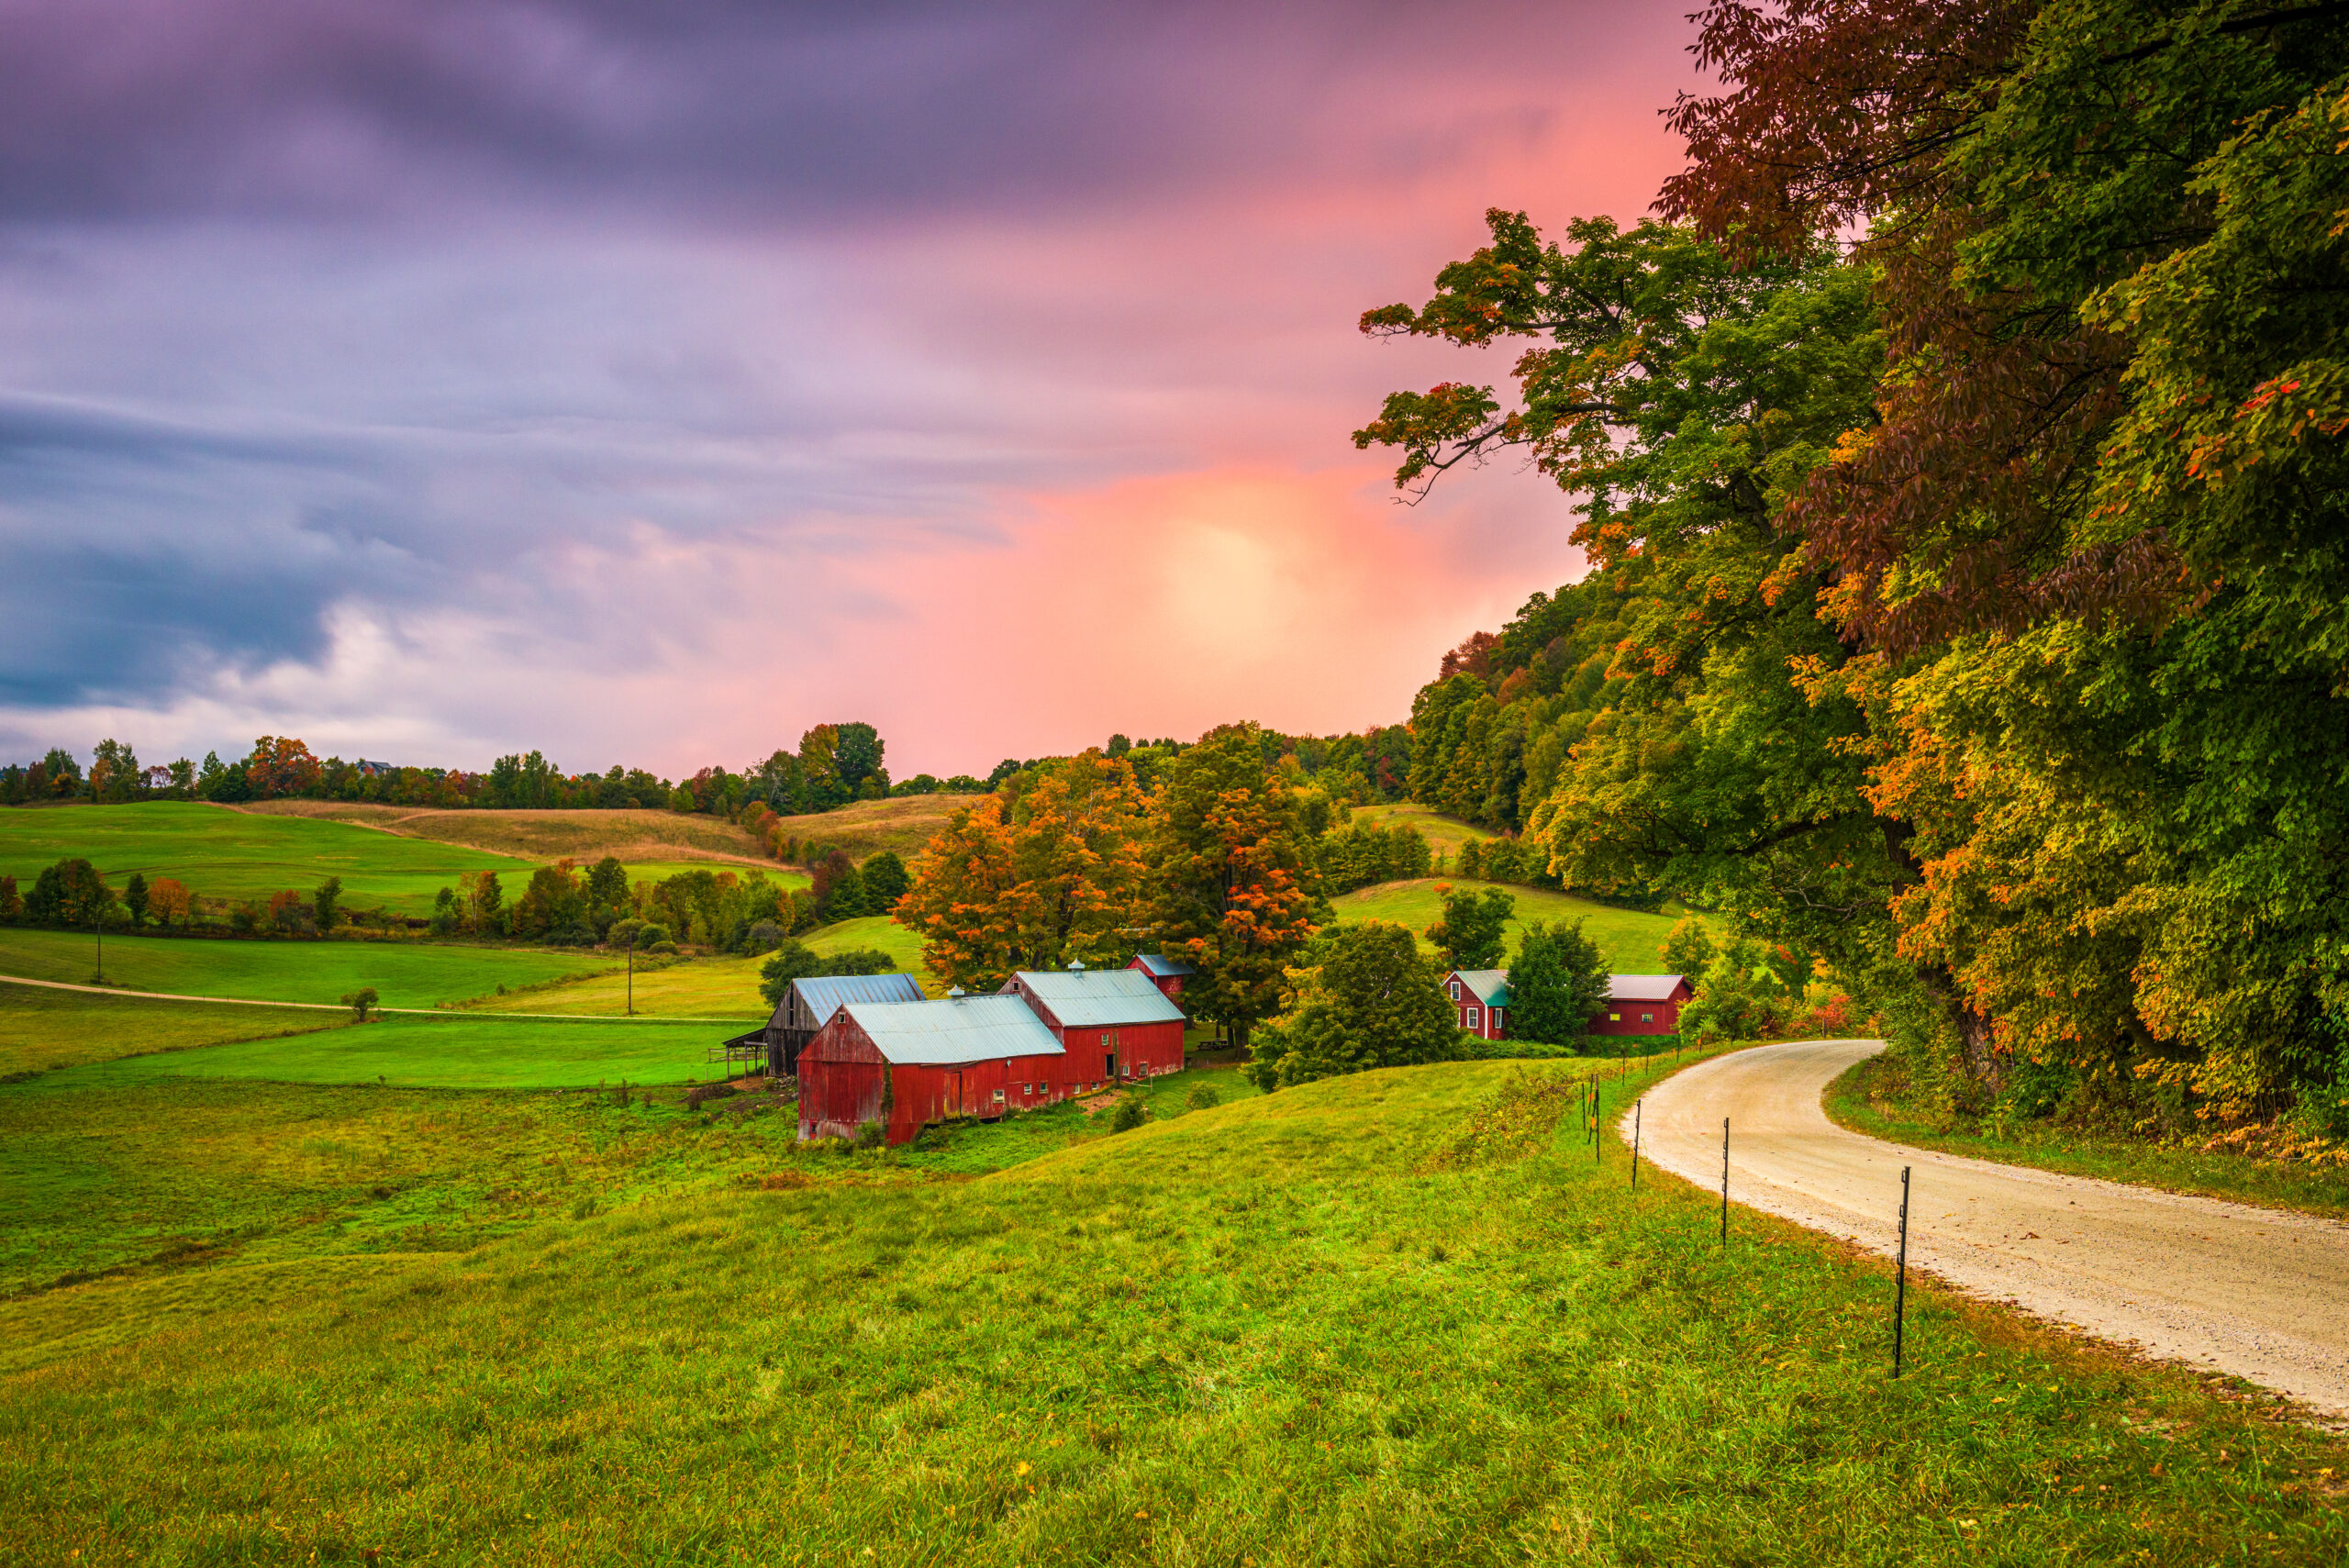 vermont farm and scenery where the Kahm Center is located